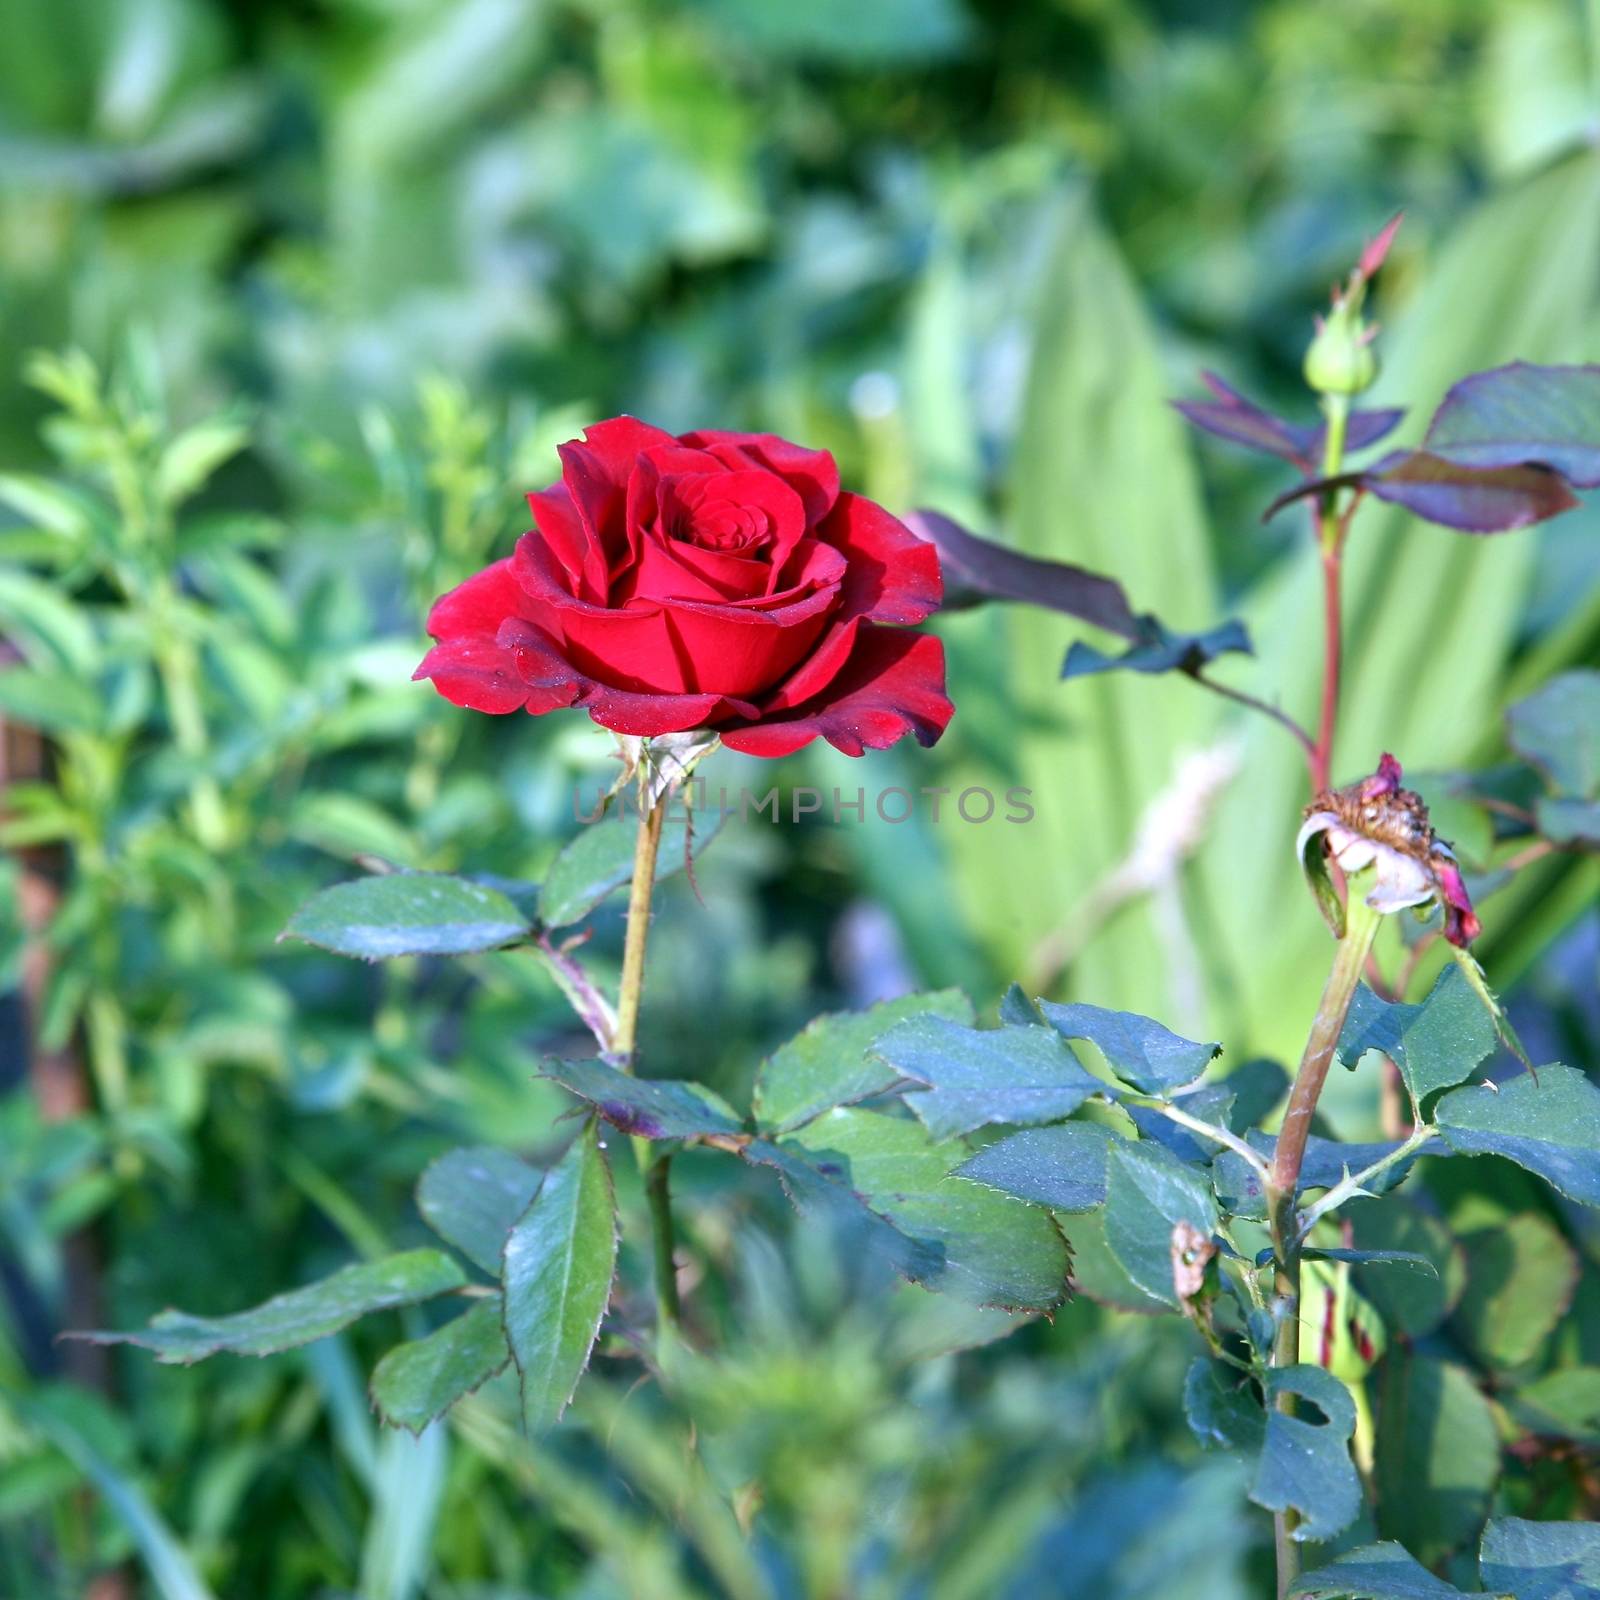 Rose bud in the garden over natural green background